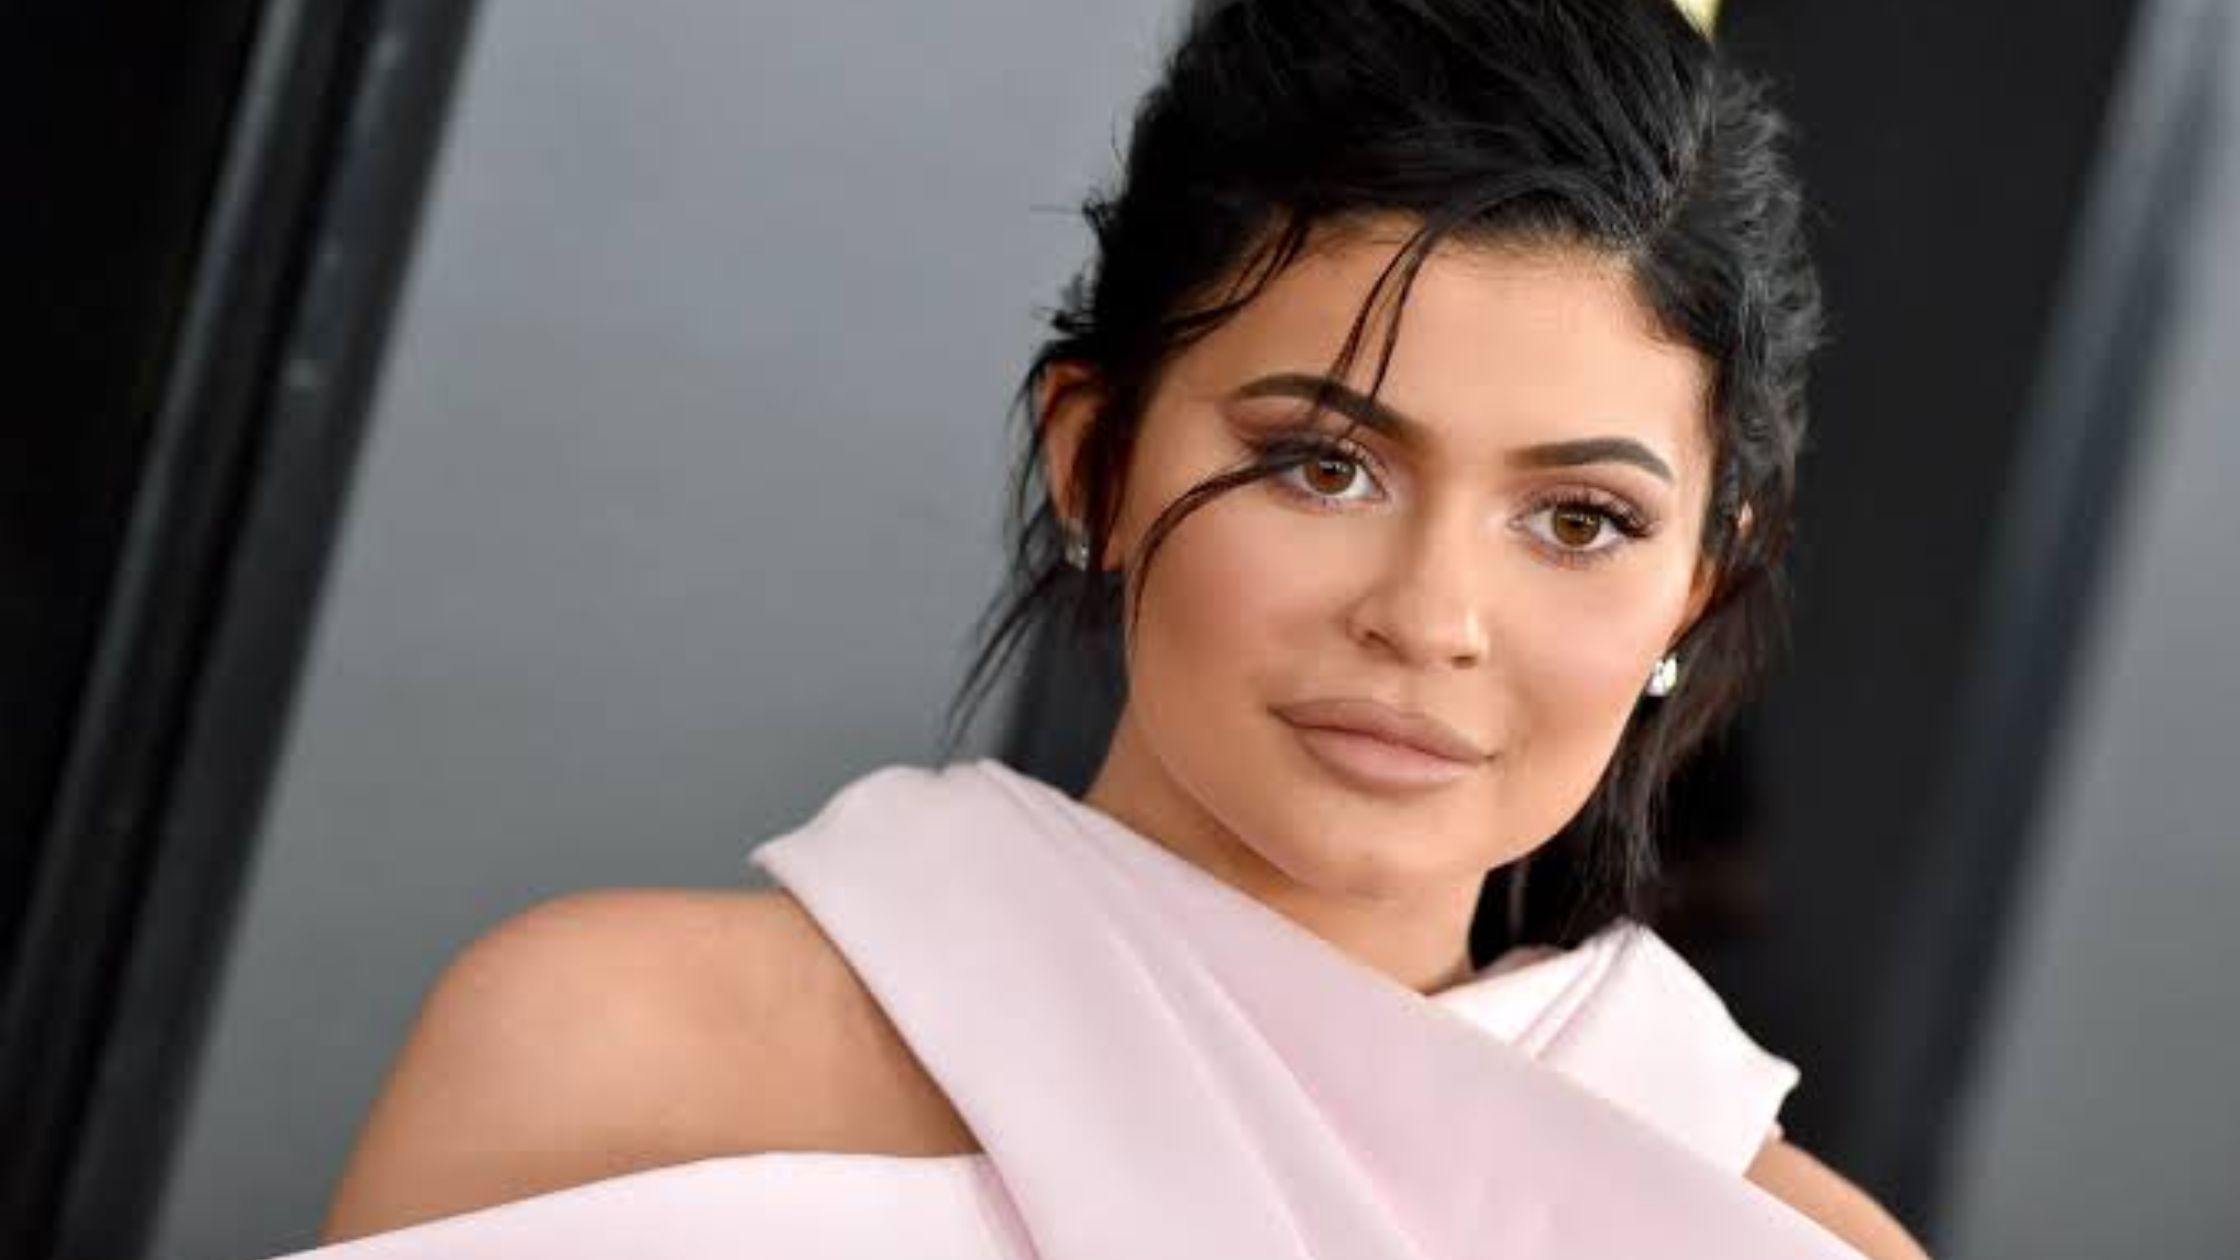 Kylie Jenner Net Worth, Family, Age, Height, Spouse, Bio